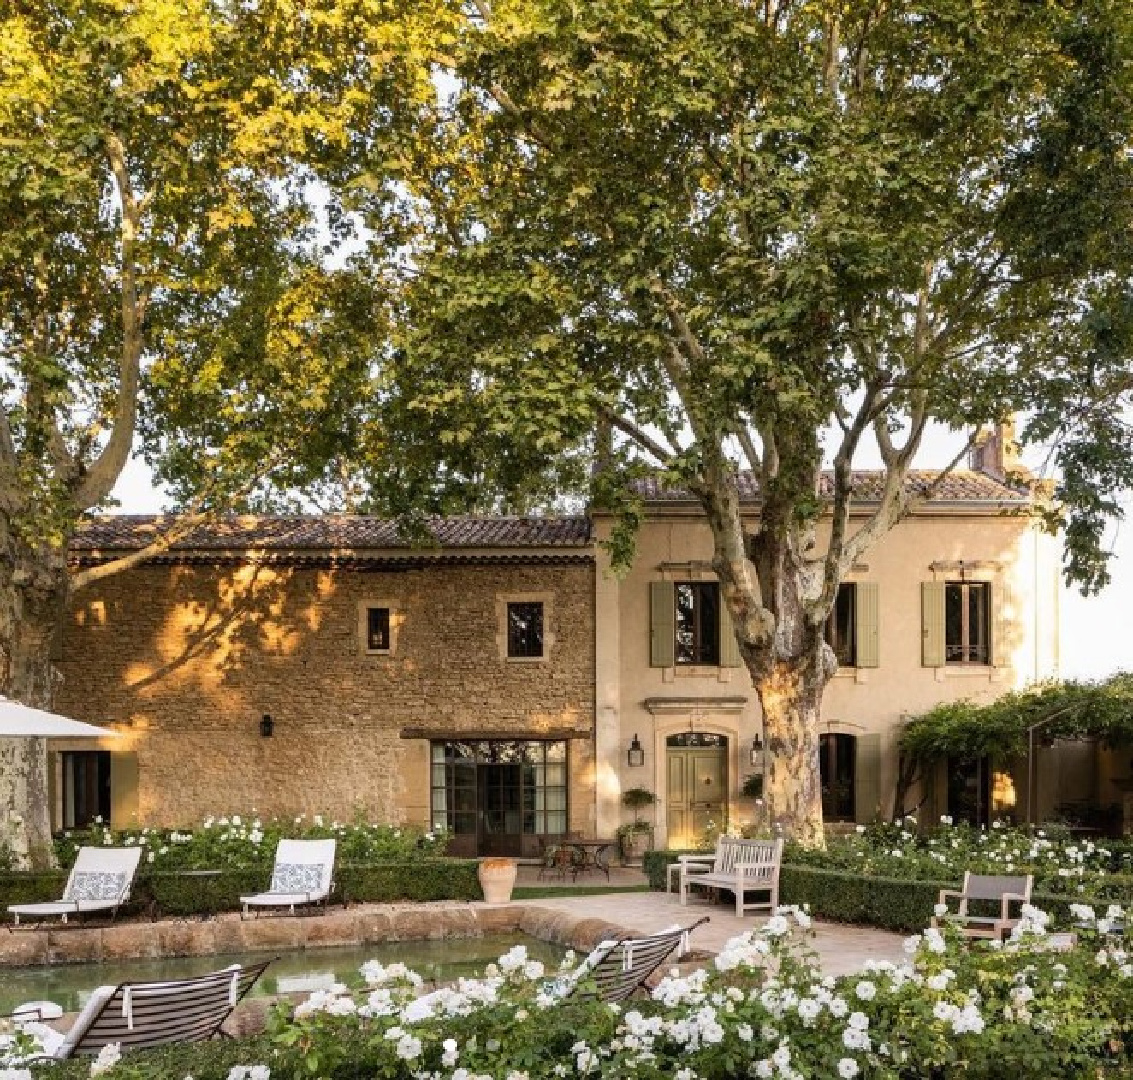 French country exterior. Warm European luxury and cozy opulence in a French vacation villa in Provence - La Bastide de Laurence. #frenchbastide #frenchvilla #luxuryvilla #provencevilla #warmeuropeanluxury #cozyopulence #provencehomes #frenchcountryarchitecture